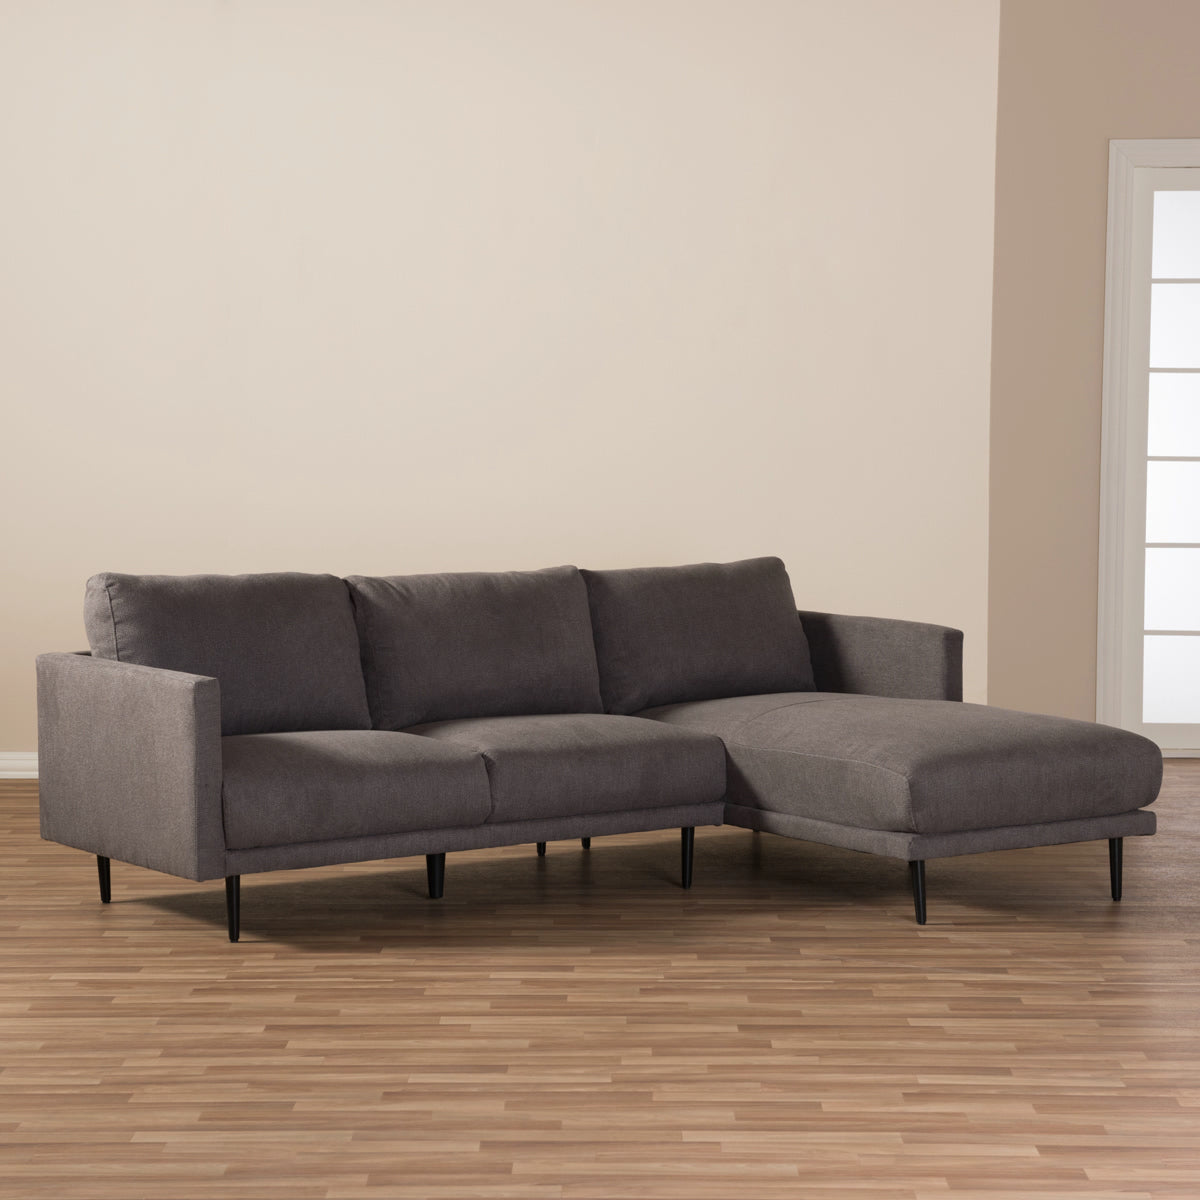 Baxton Studio Riley Retro Mid-Century Modern Grey Fabric Upholstered Right Facing Chaise Sectional Sofa Baxton Studio-sectionals-Minimal And Modern - 3